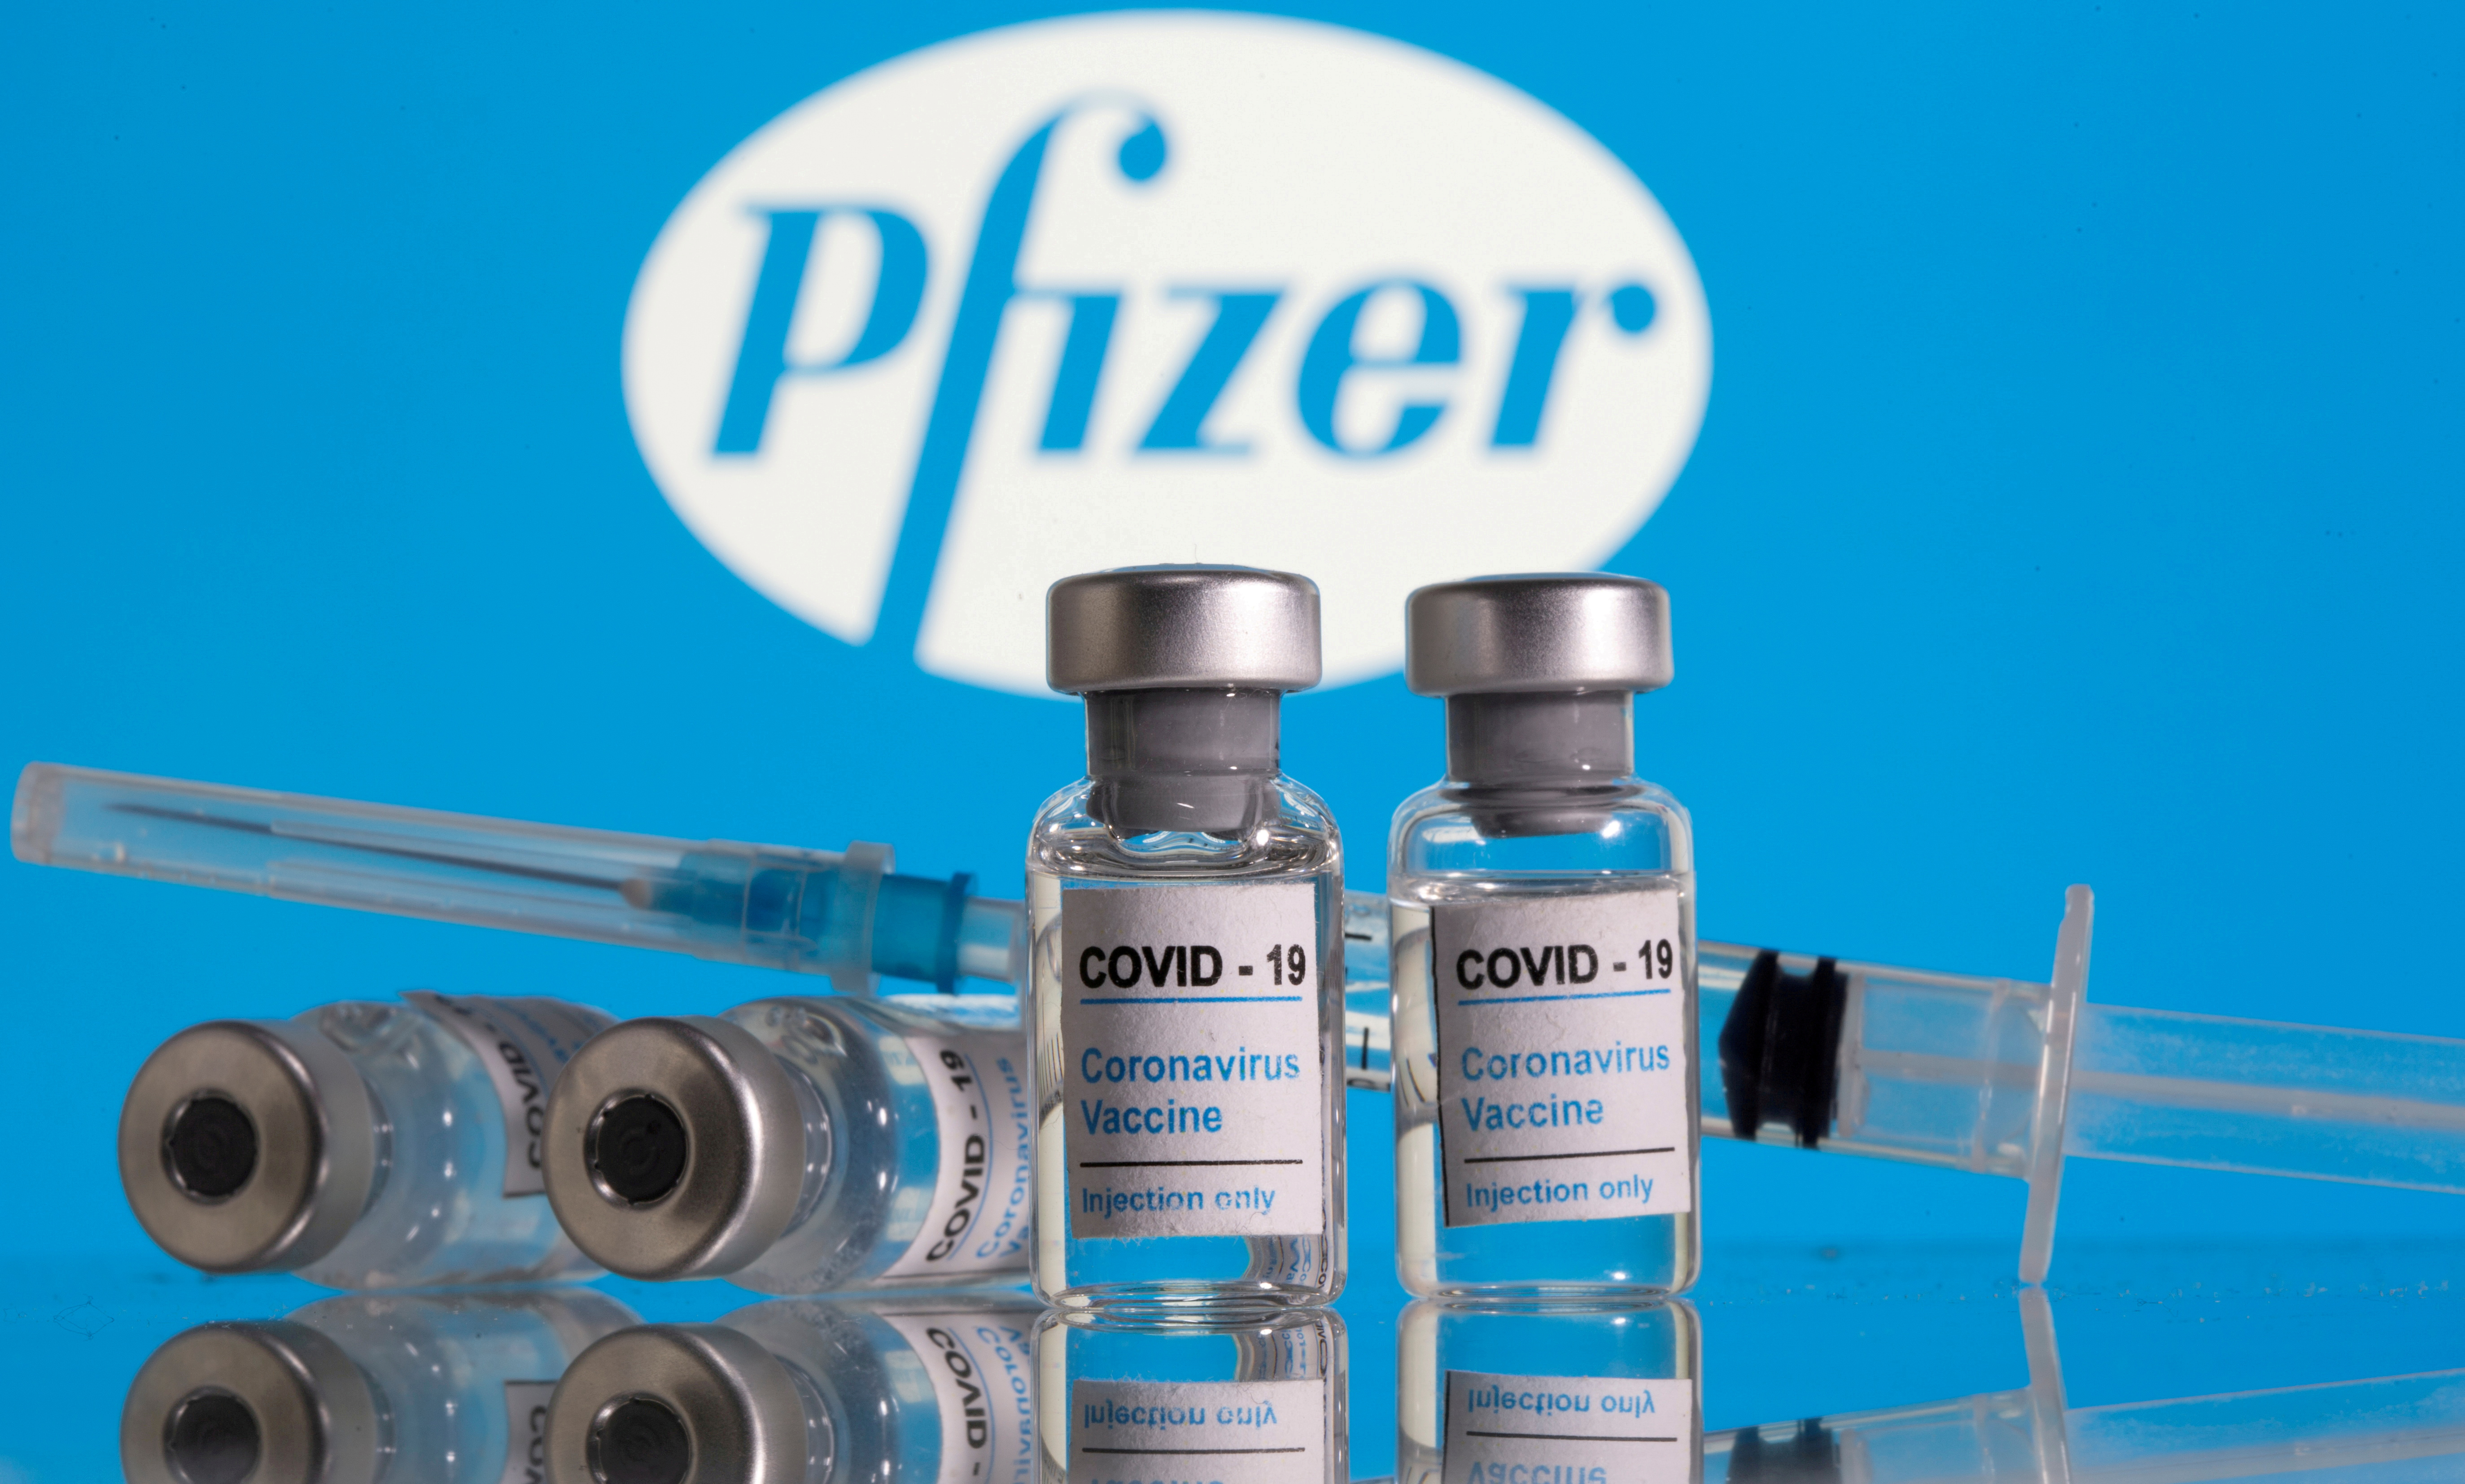 Vials labelled "COVID-19 Coronavirus Vaccine" and a syringe are seen in front of the Pfizer logo in this illustration taken February 9, 2021. REUTERS/Dado Ruvic